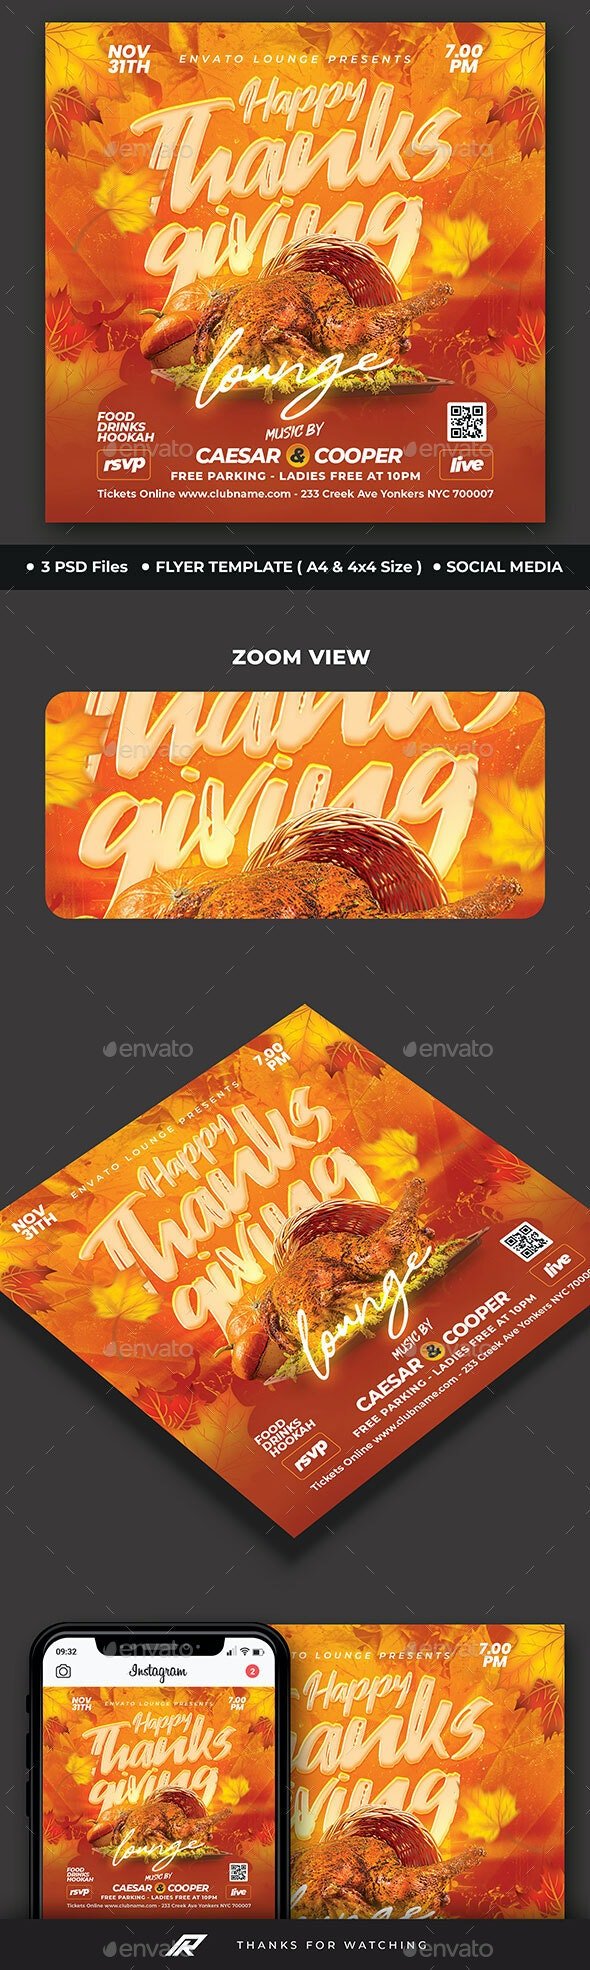 GraphicRiver - Thanksgiving Flyer - 48918312